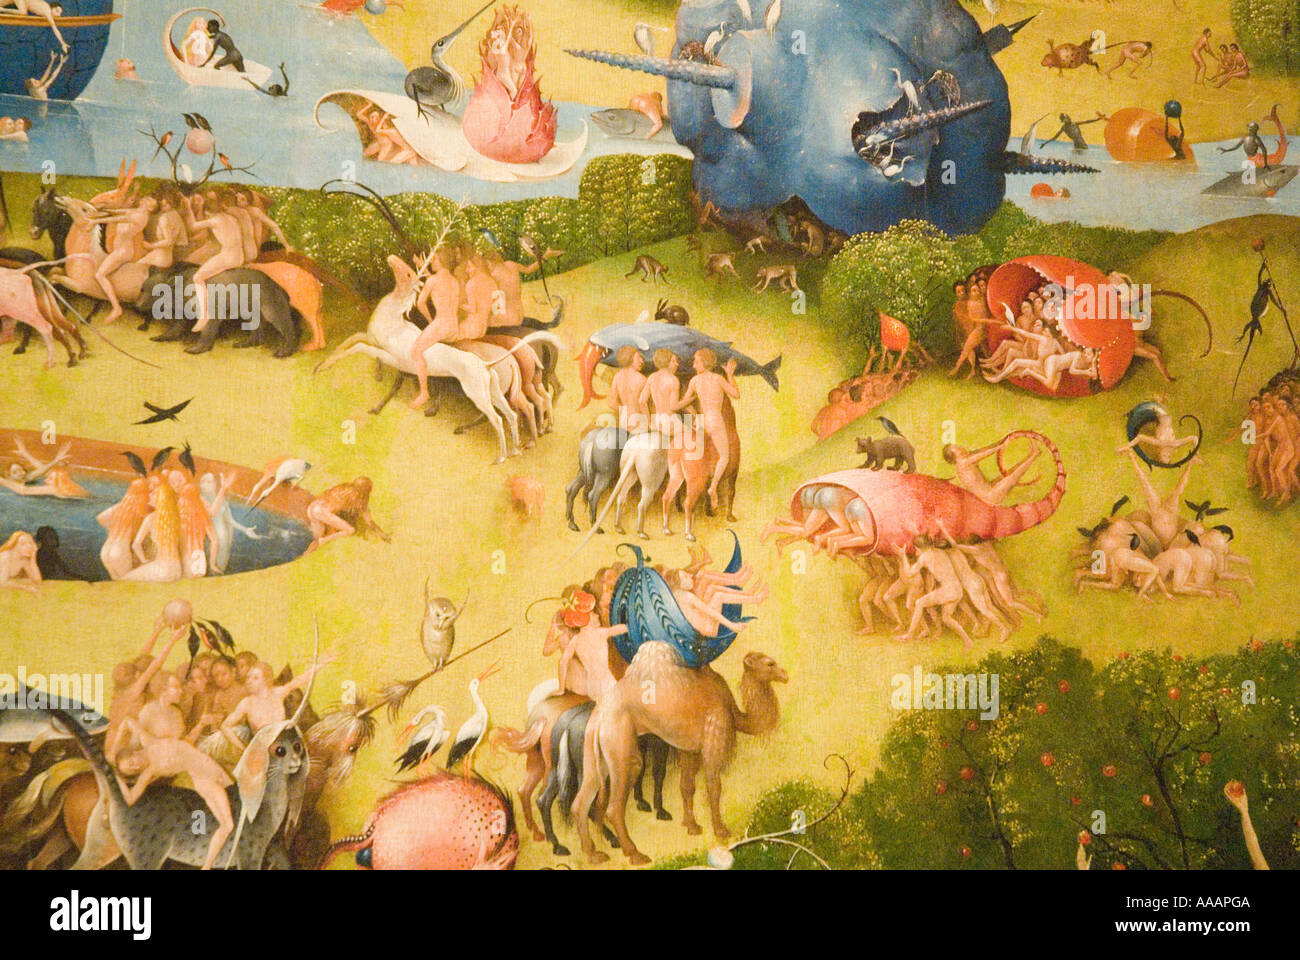 Garden of Earthly Delights painting by Hieronymus Bosch Stock Photo